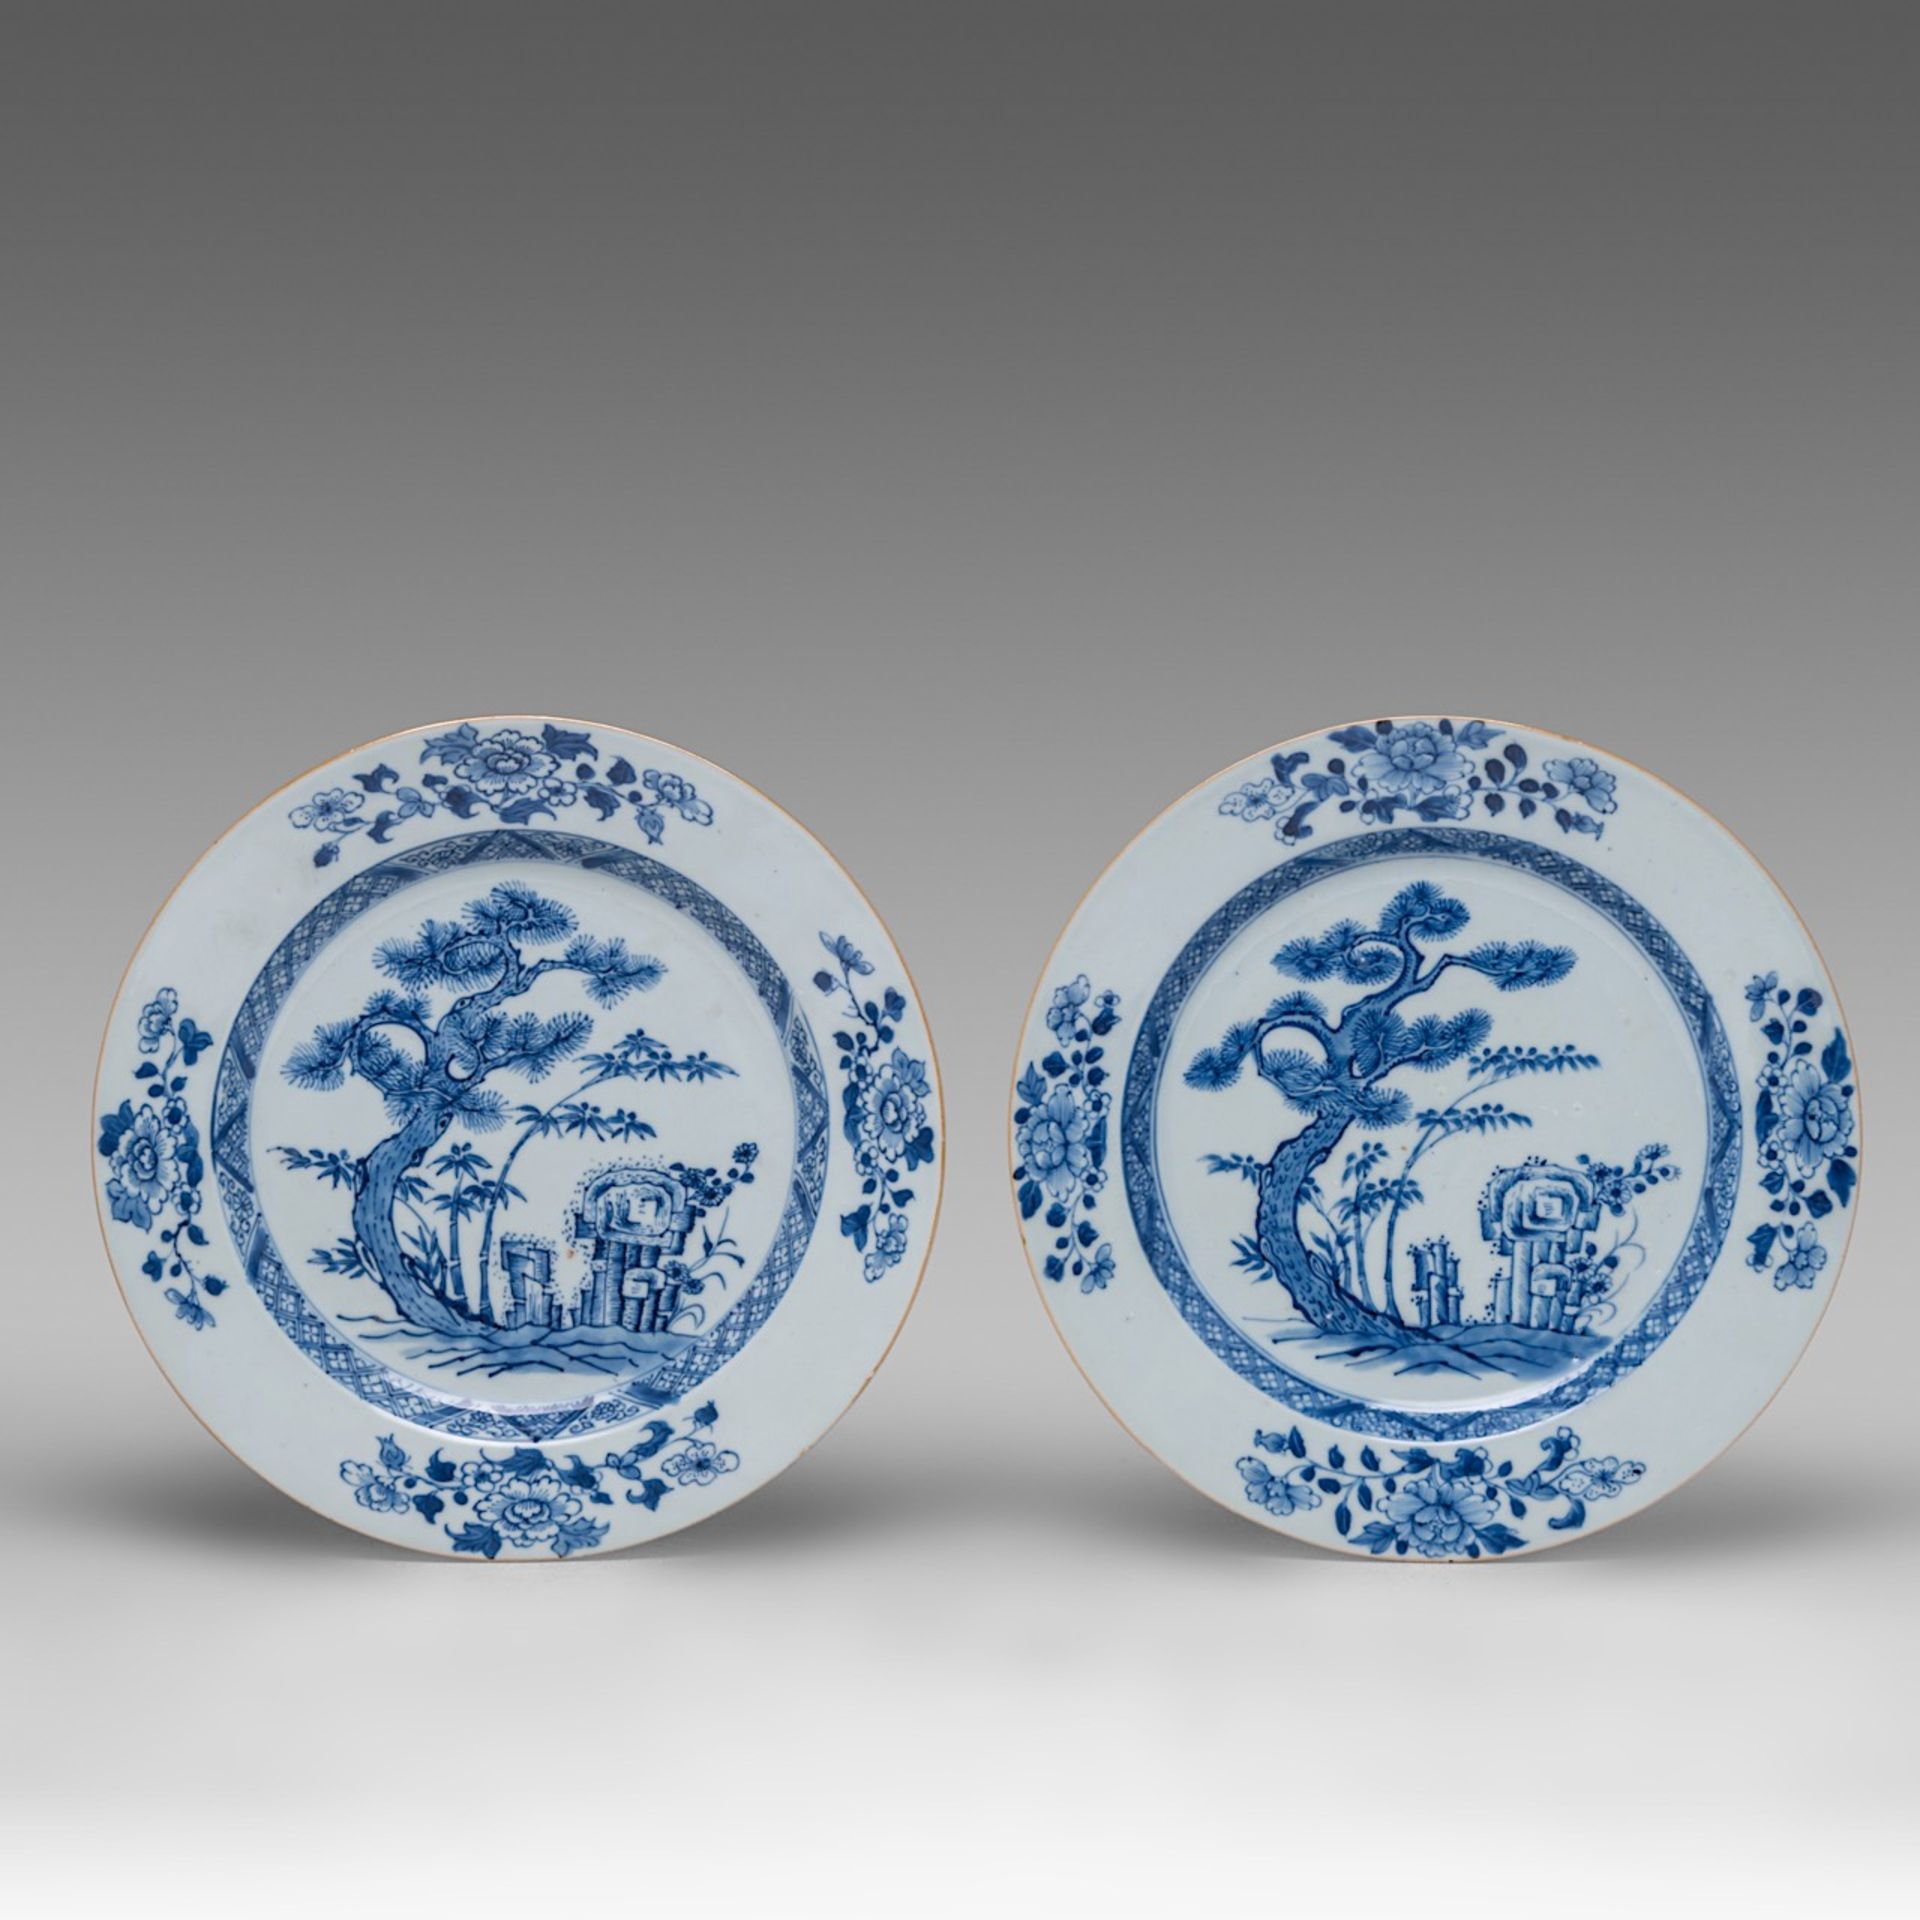 A series of four Chinese blue and white 'Bamboo below Pine' dishes and plates, 18thC, dia 22,5 - 28, - Image 10 of 12